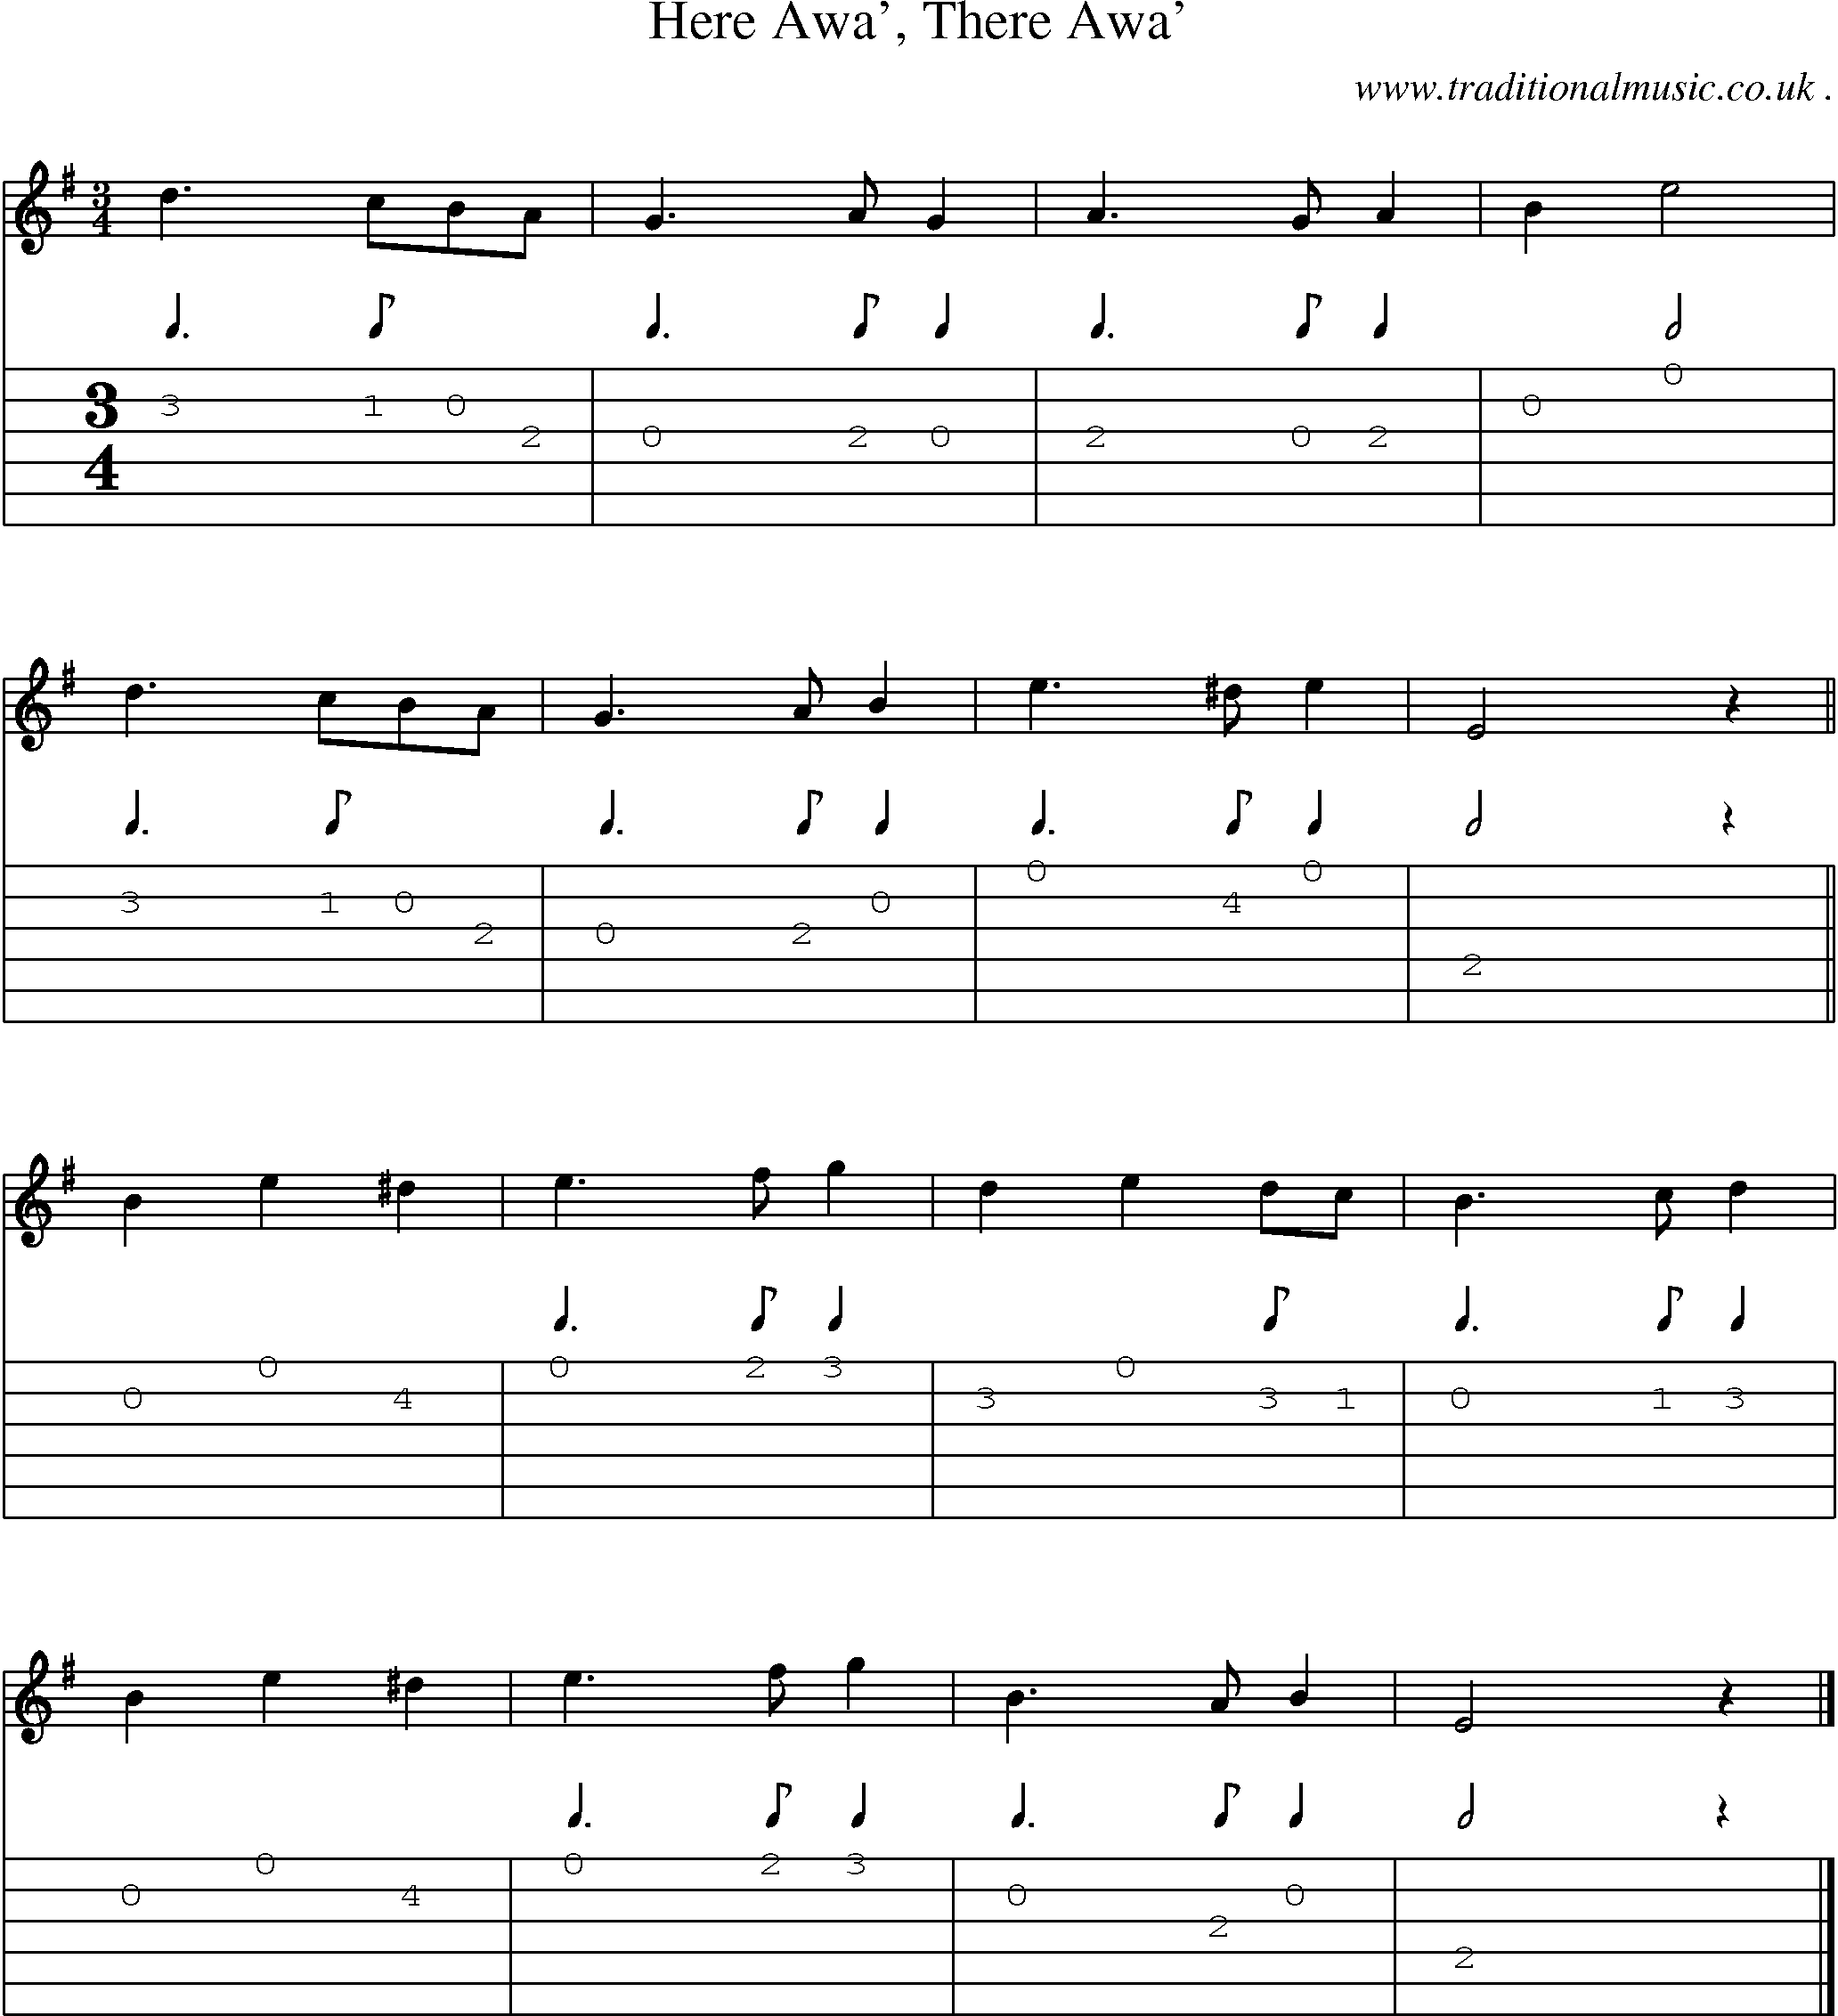 Sheet-music  score, Chords and Guitar Tabs for Here Awa There Awa